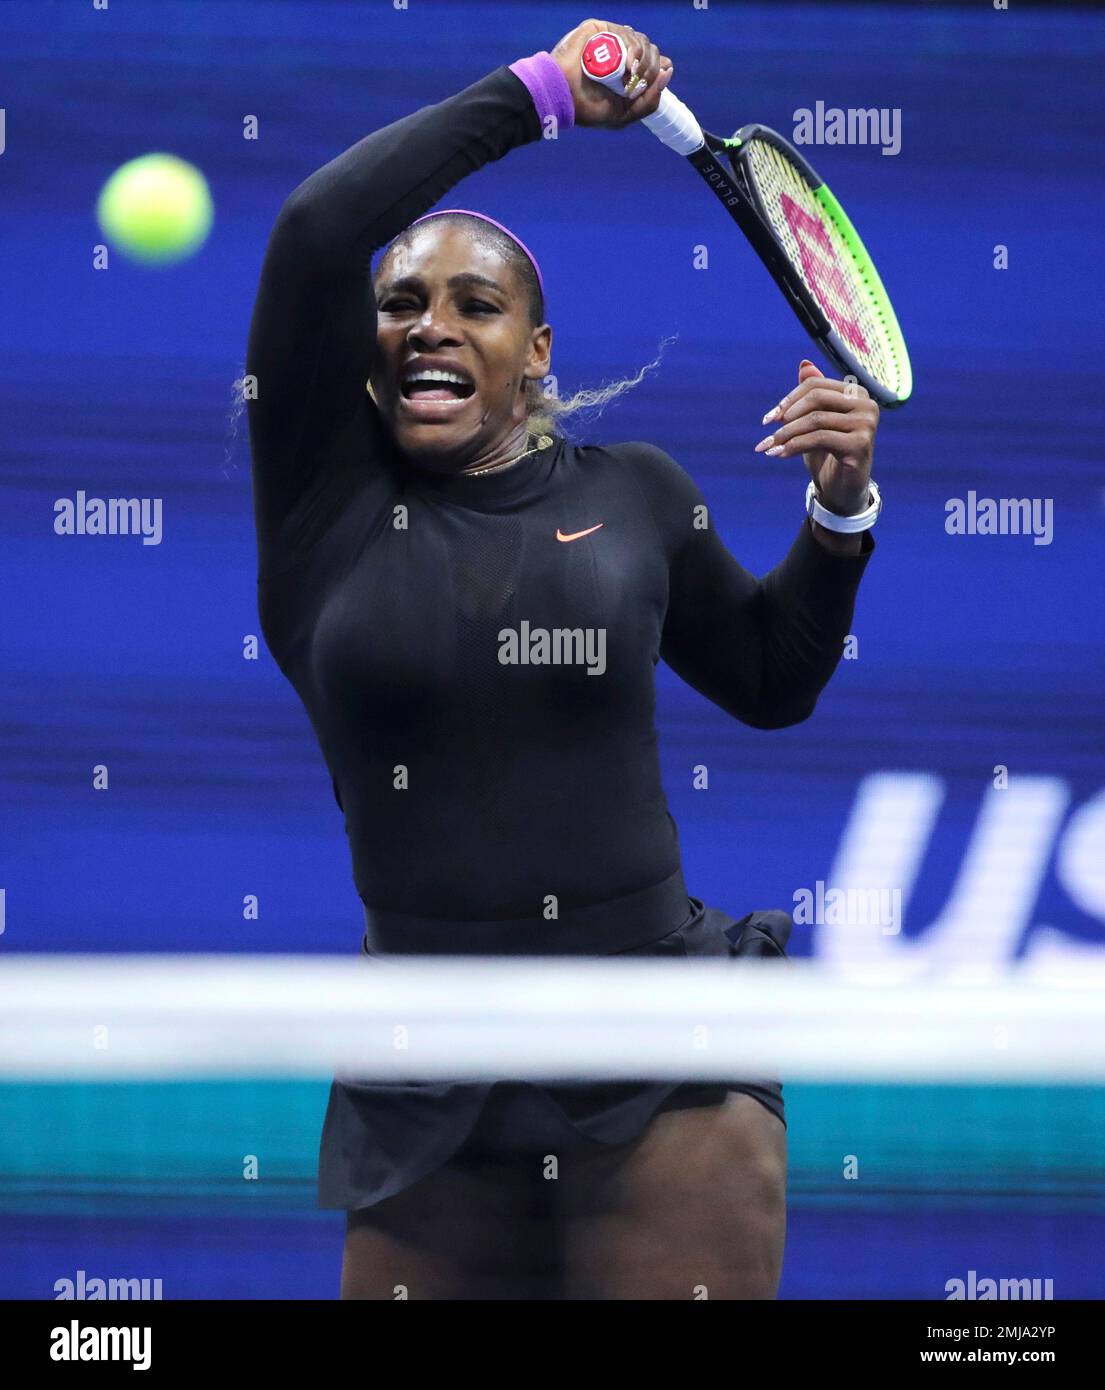 Serena Williams, of the United States, follow through on a return to Caty  McNally, of the United States, during the second round of the U.S. Open  tennis tournament in New York, Wednesday,